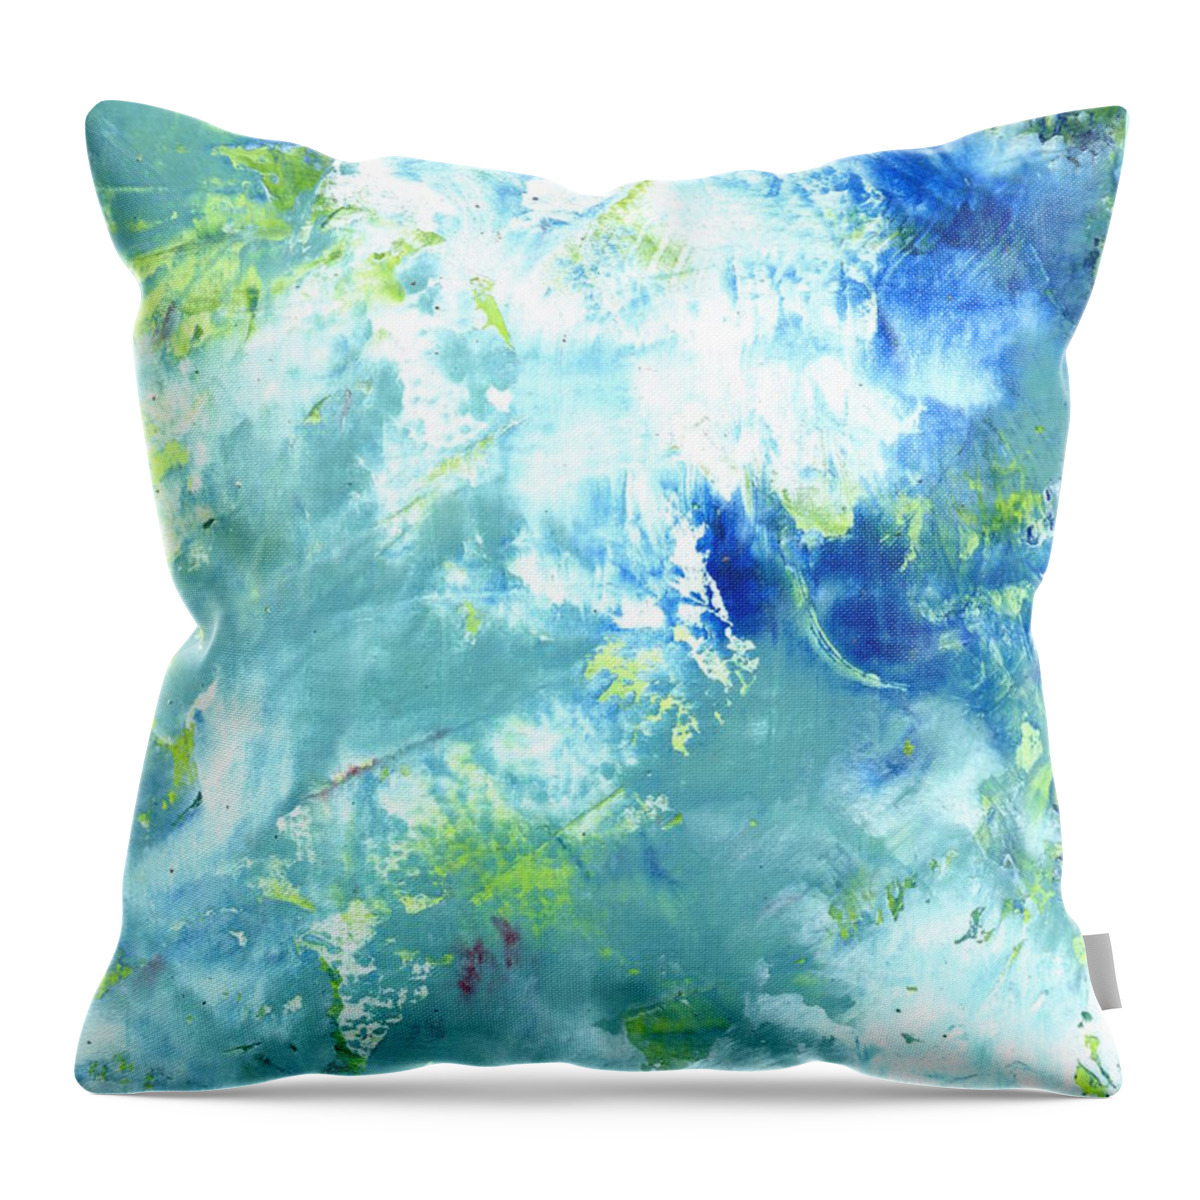 Oil Throw Pillow featuring the painting Listening by Marcy Brennan